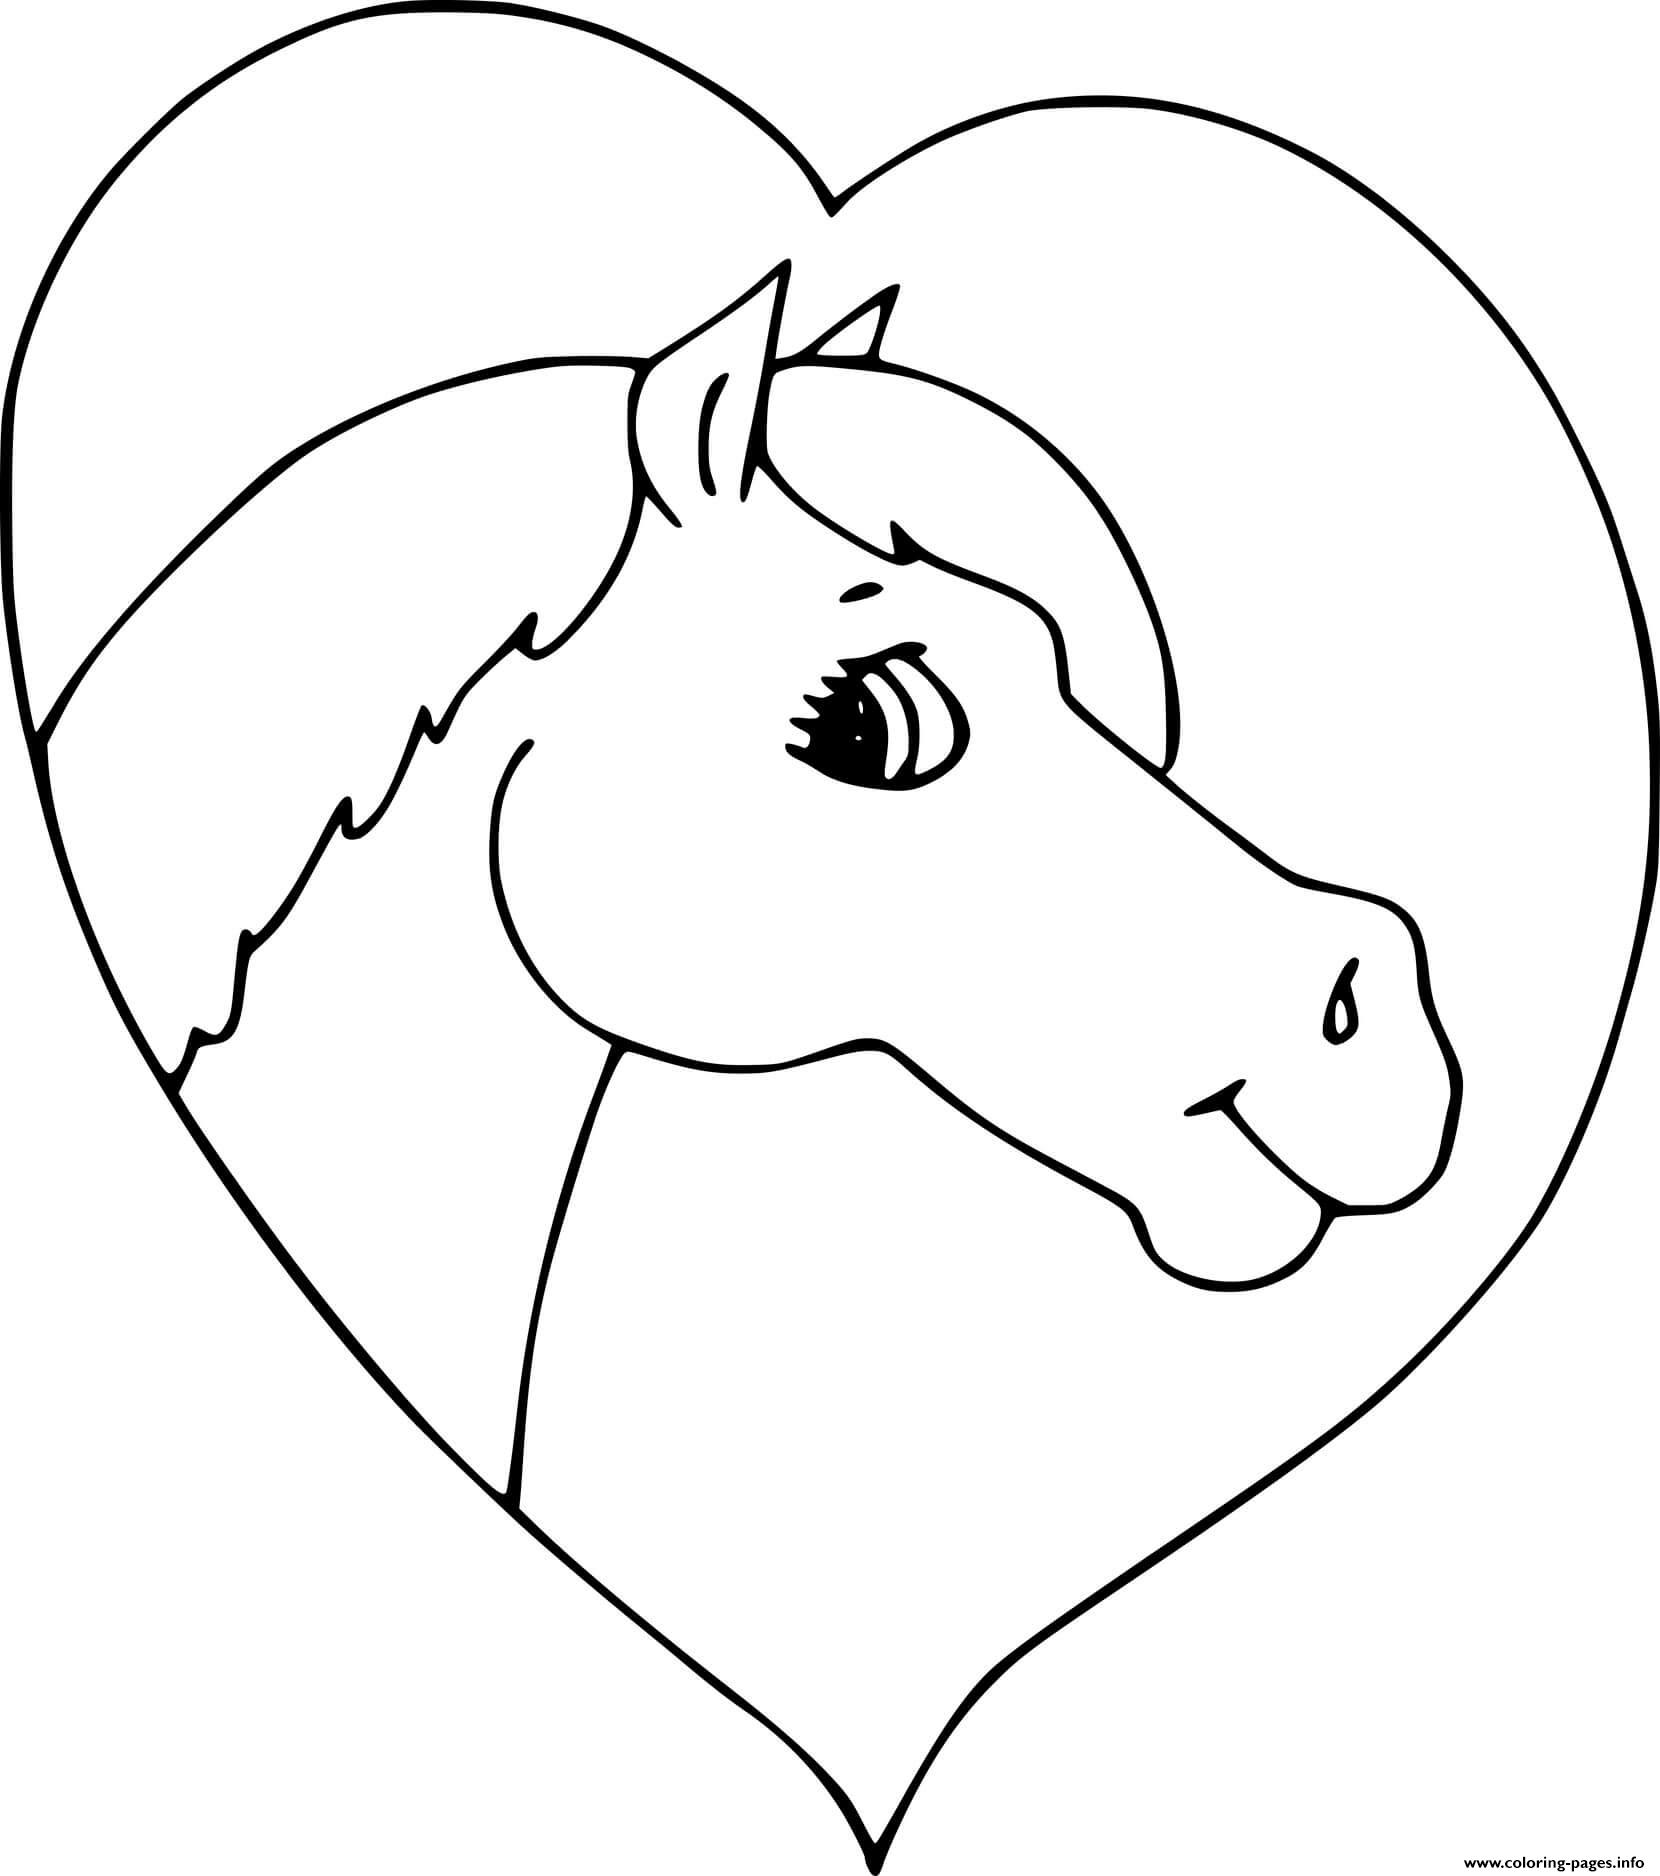 Horse In A Heart coloring